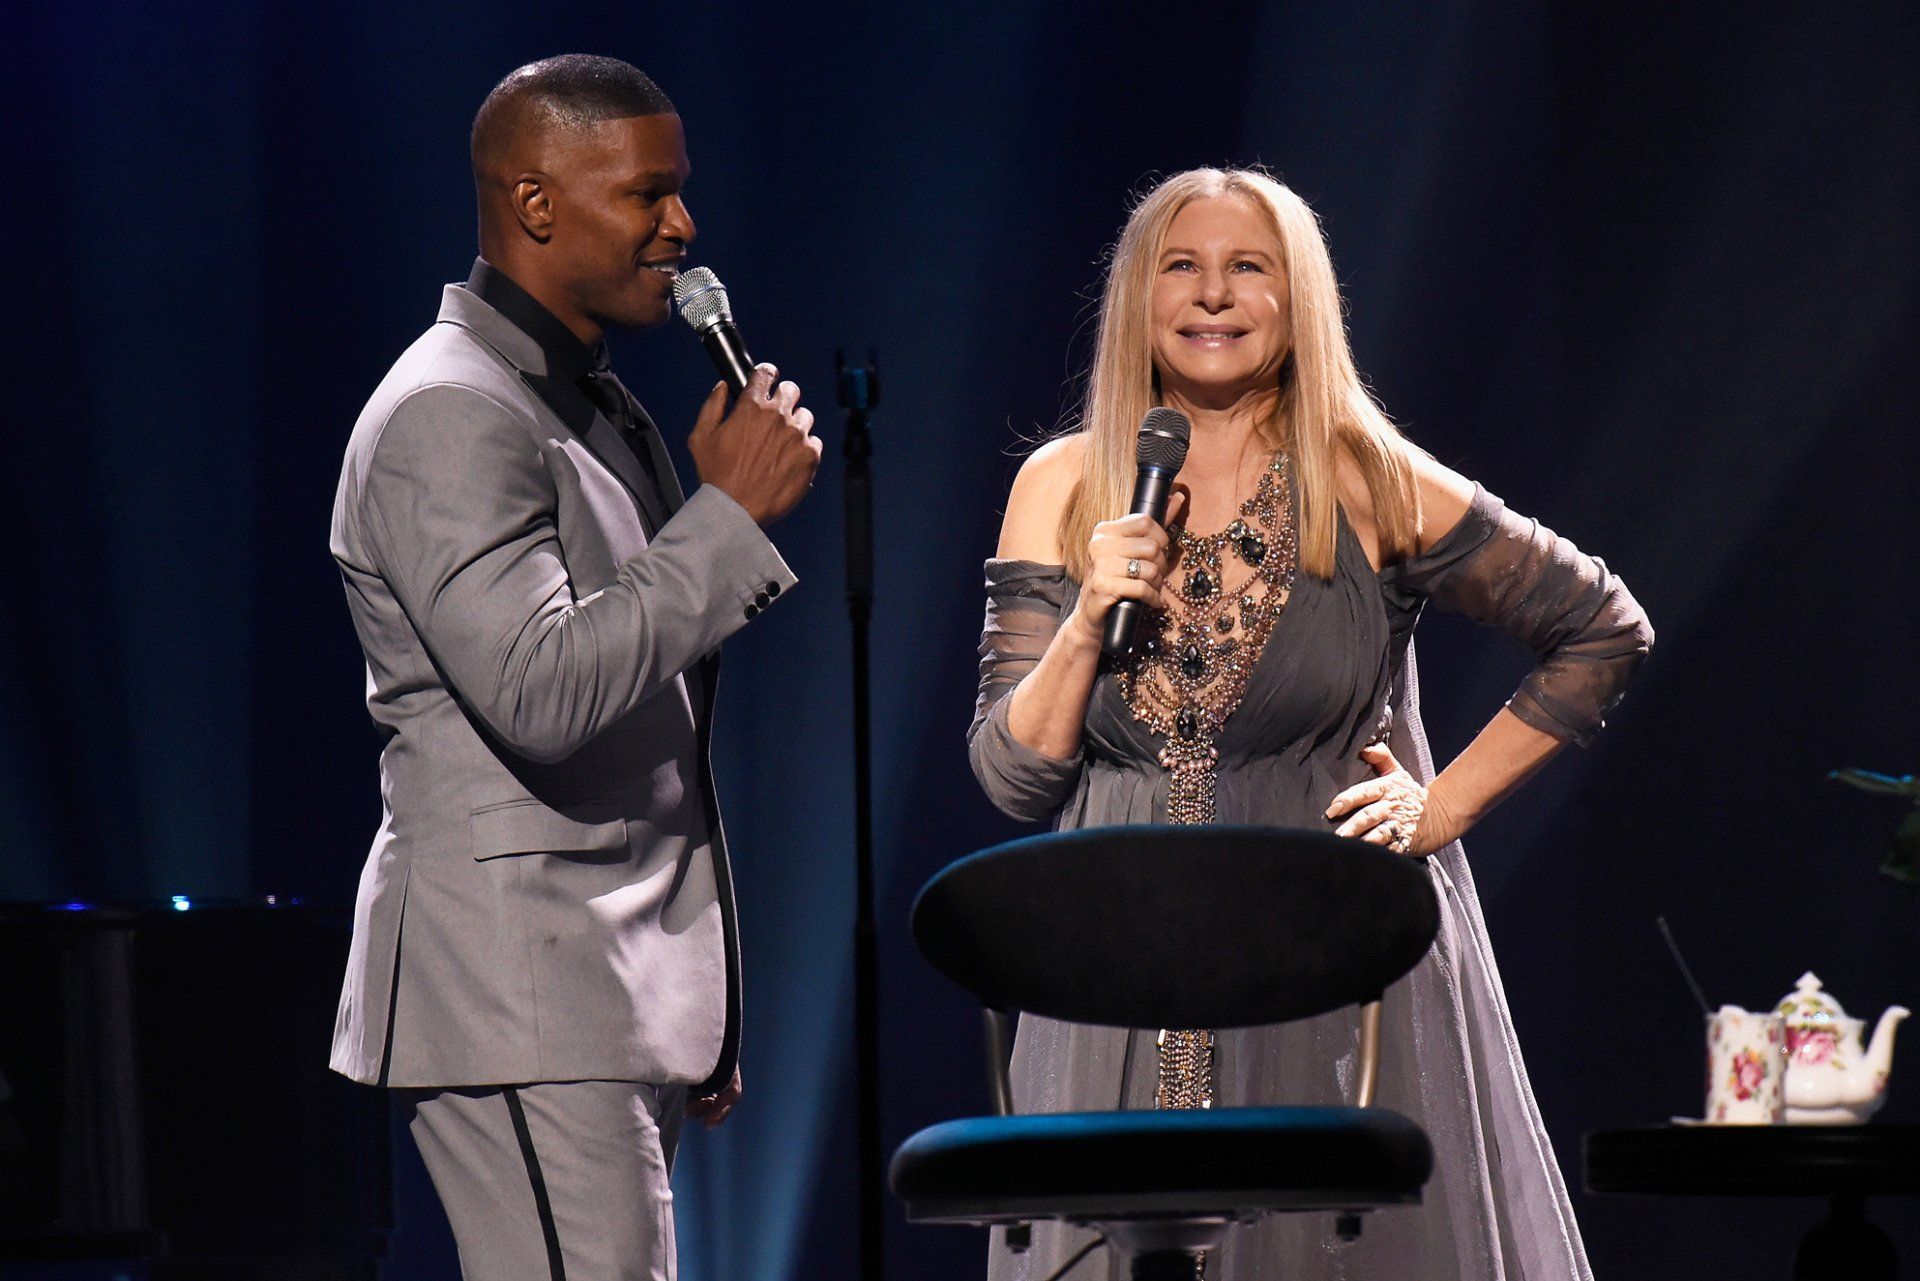 Jamie Foxx and Streisand duet in Miami. The concert was filmed as a Netflix special.